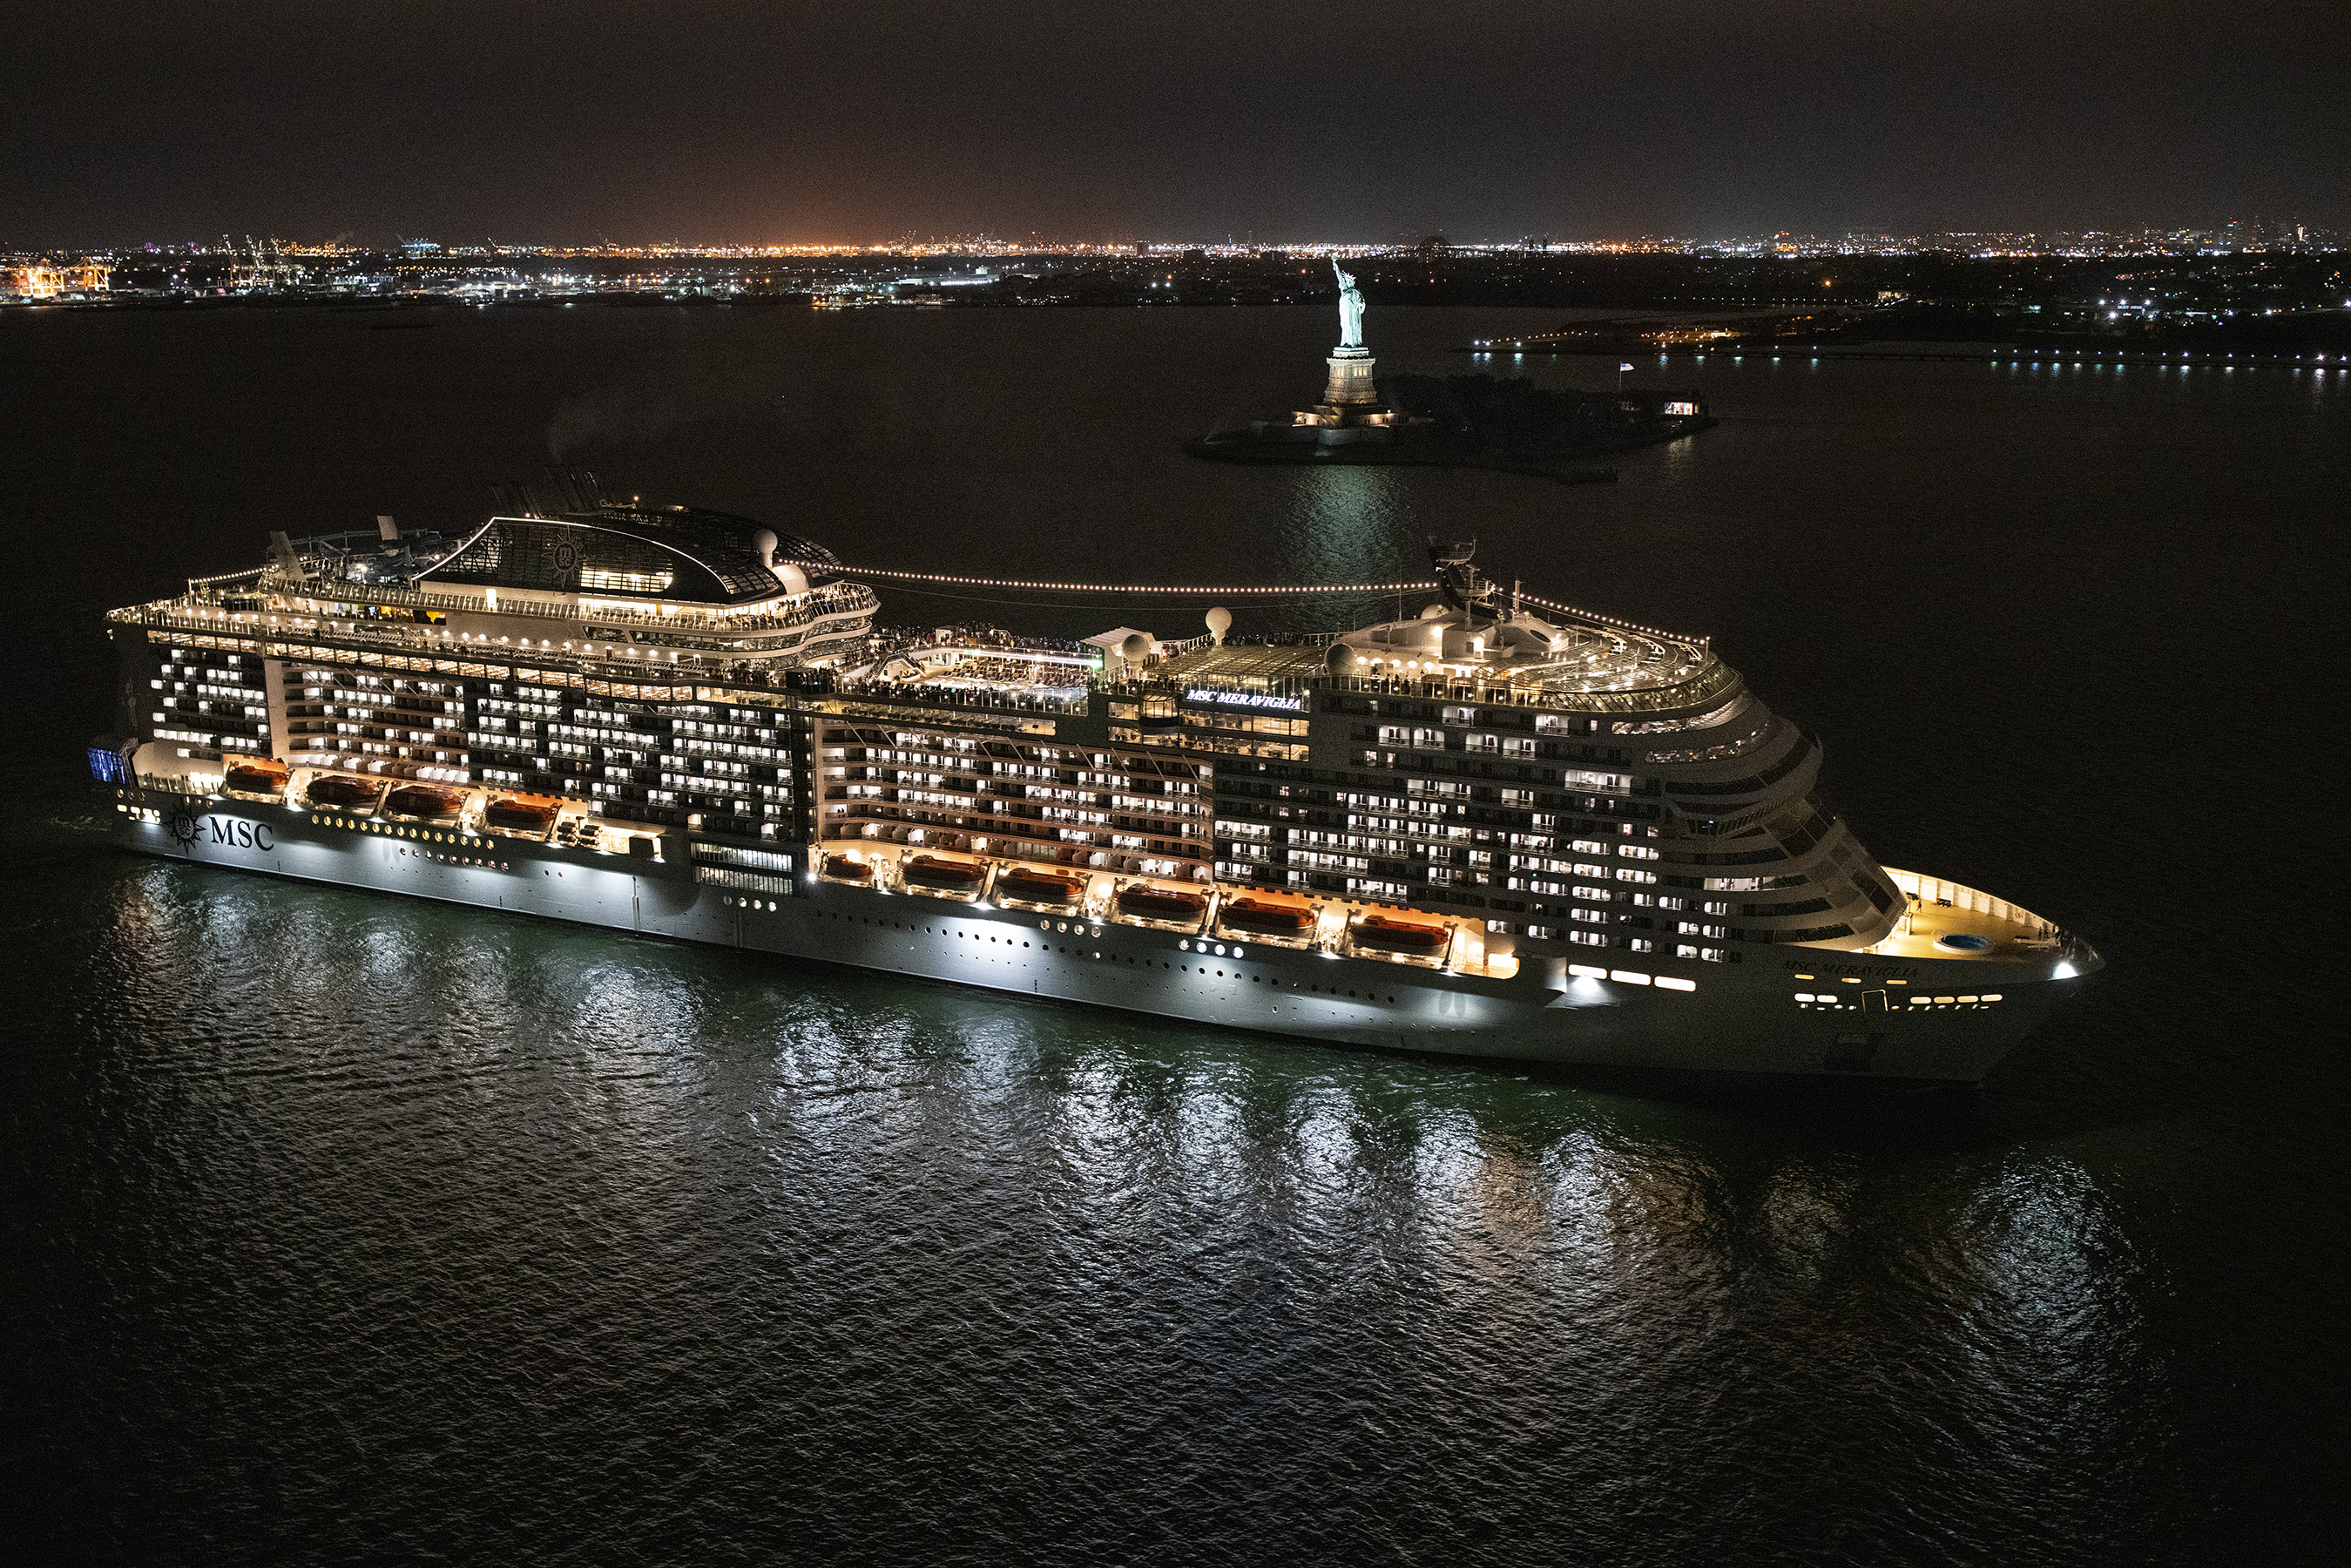 MSC Meraviglia will begin home porting in Miami on November 10, sailing 7-night Caribbean itineraries including stops to MSC Cruises’ private Bahamian destination, Ocean Cay MSC Marine Reserve.